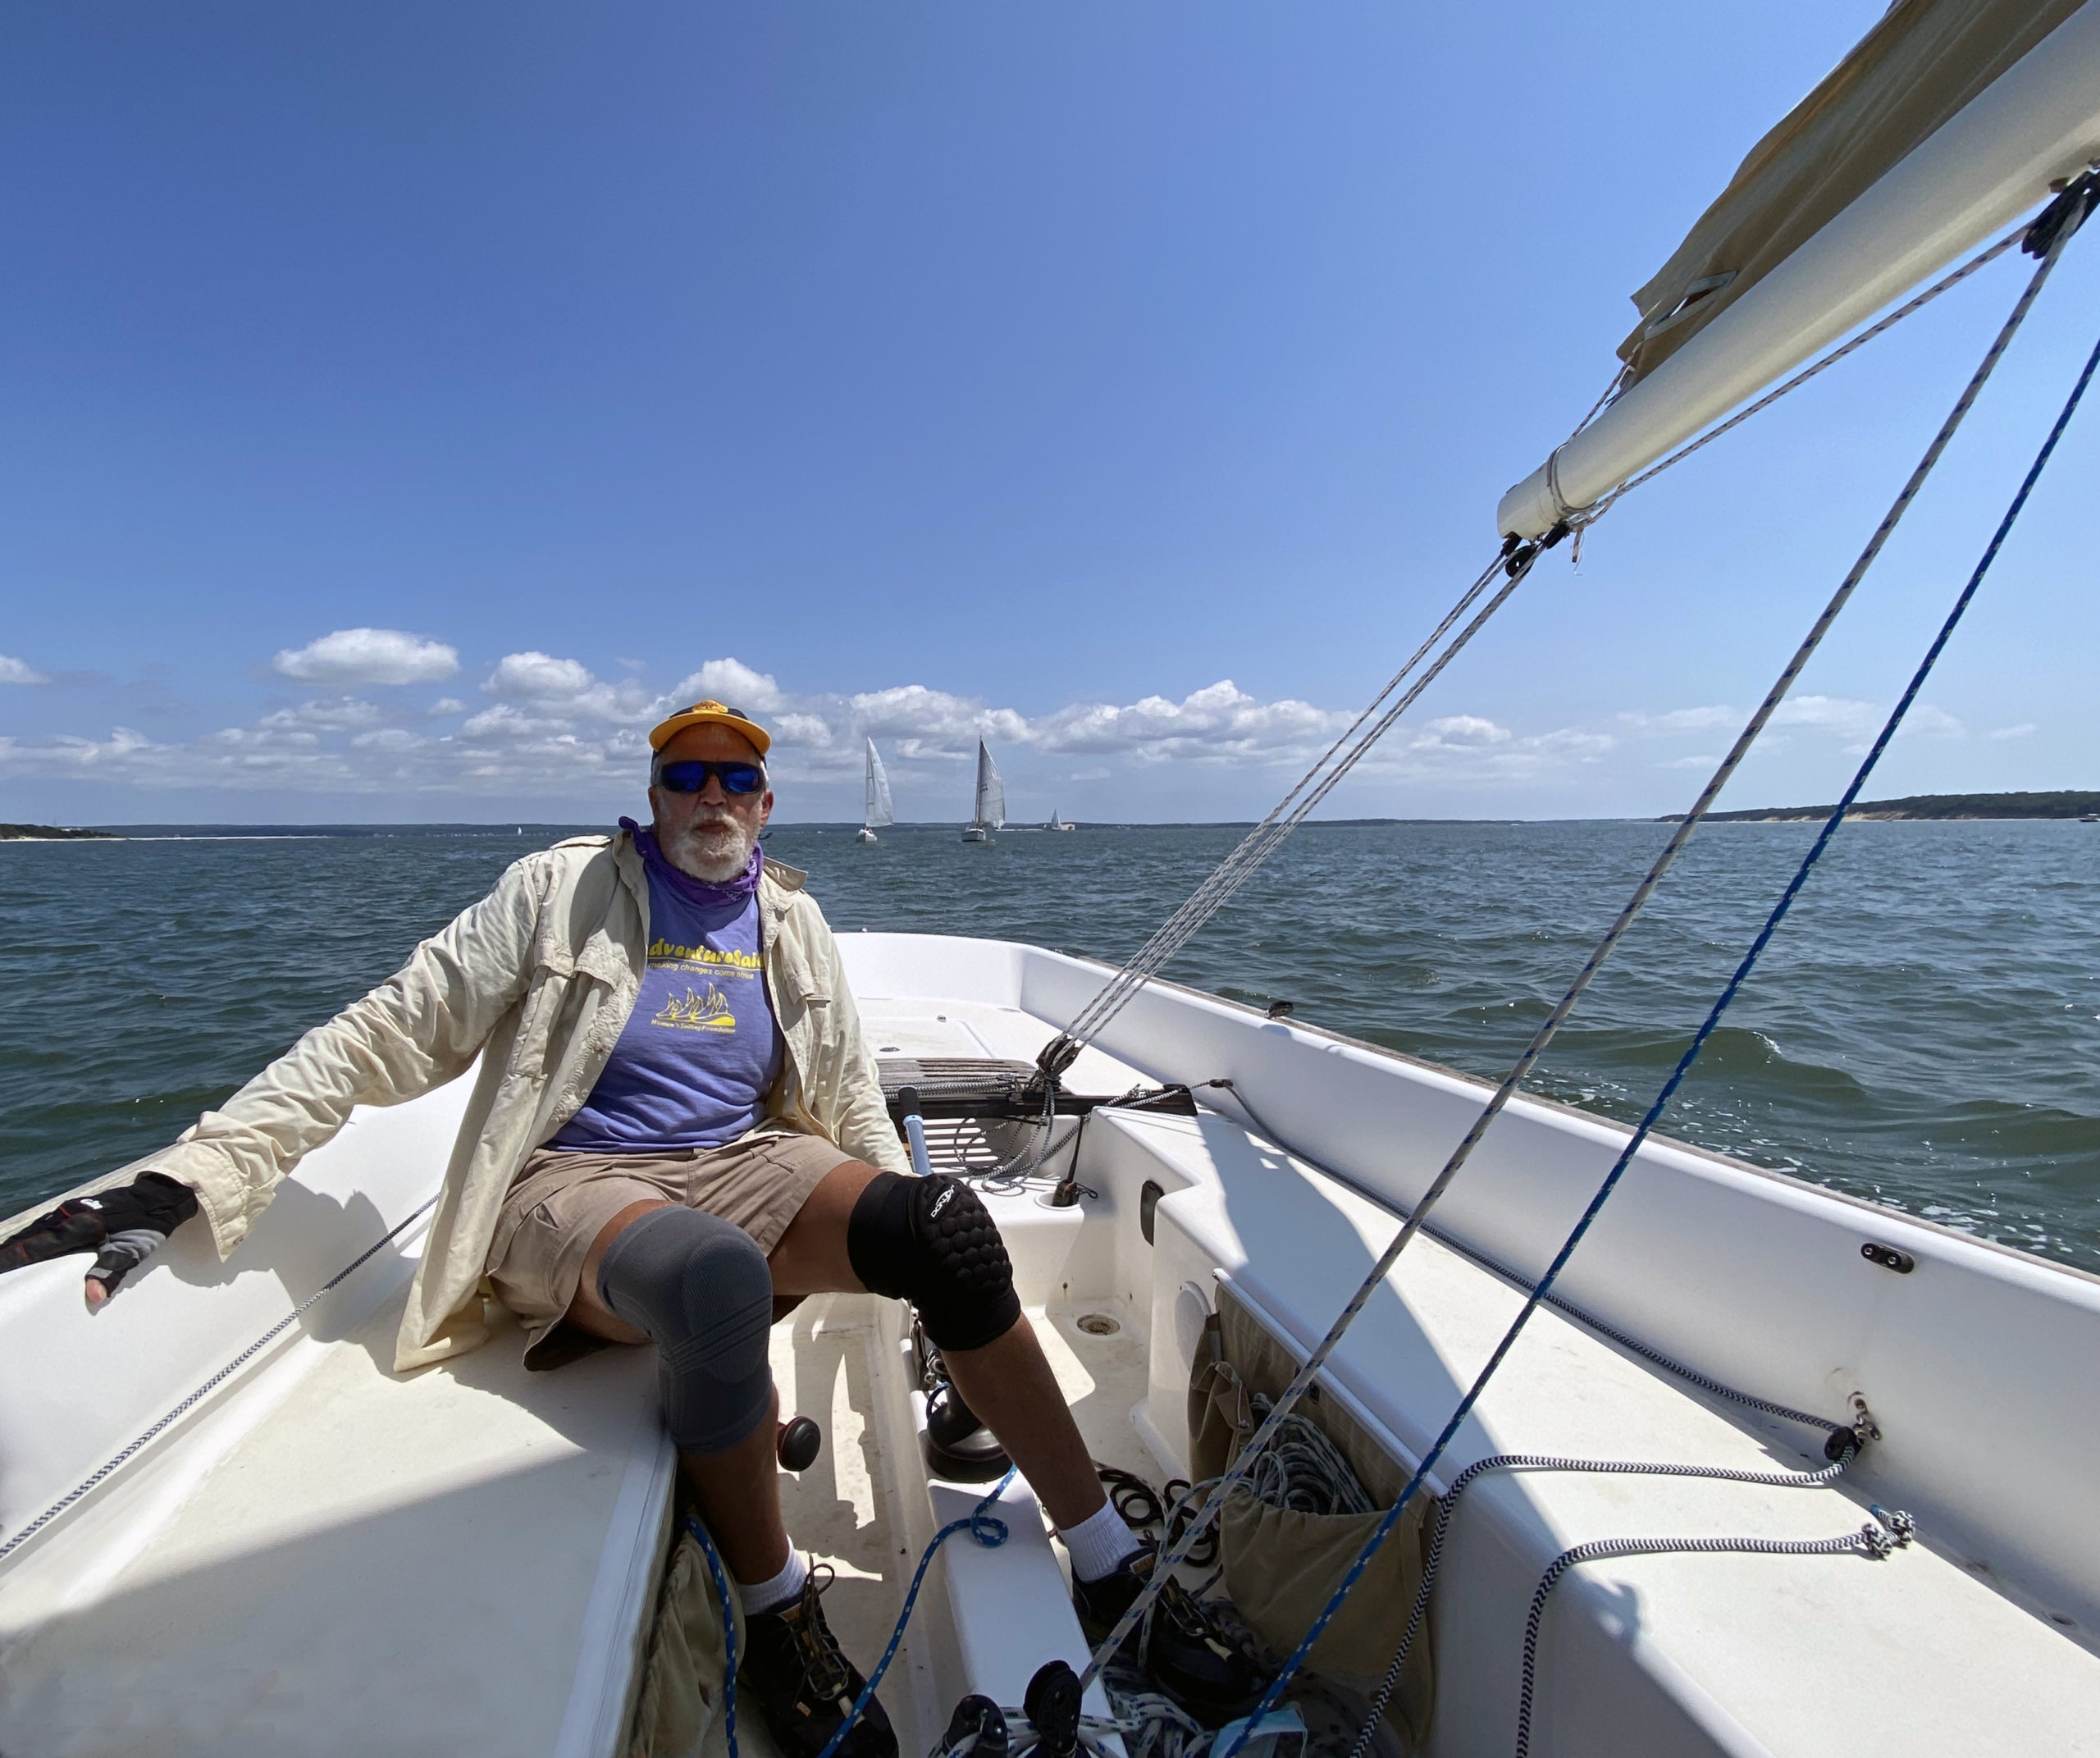 Michael Mella the helm of the Etchells e-33 yacht, Entropy during the Peconic Bay Sailing Association race on Saturday hosted by the New Suffolk Old Cove Yacht Club.         BILL EDWARDS